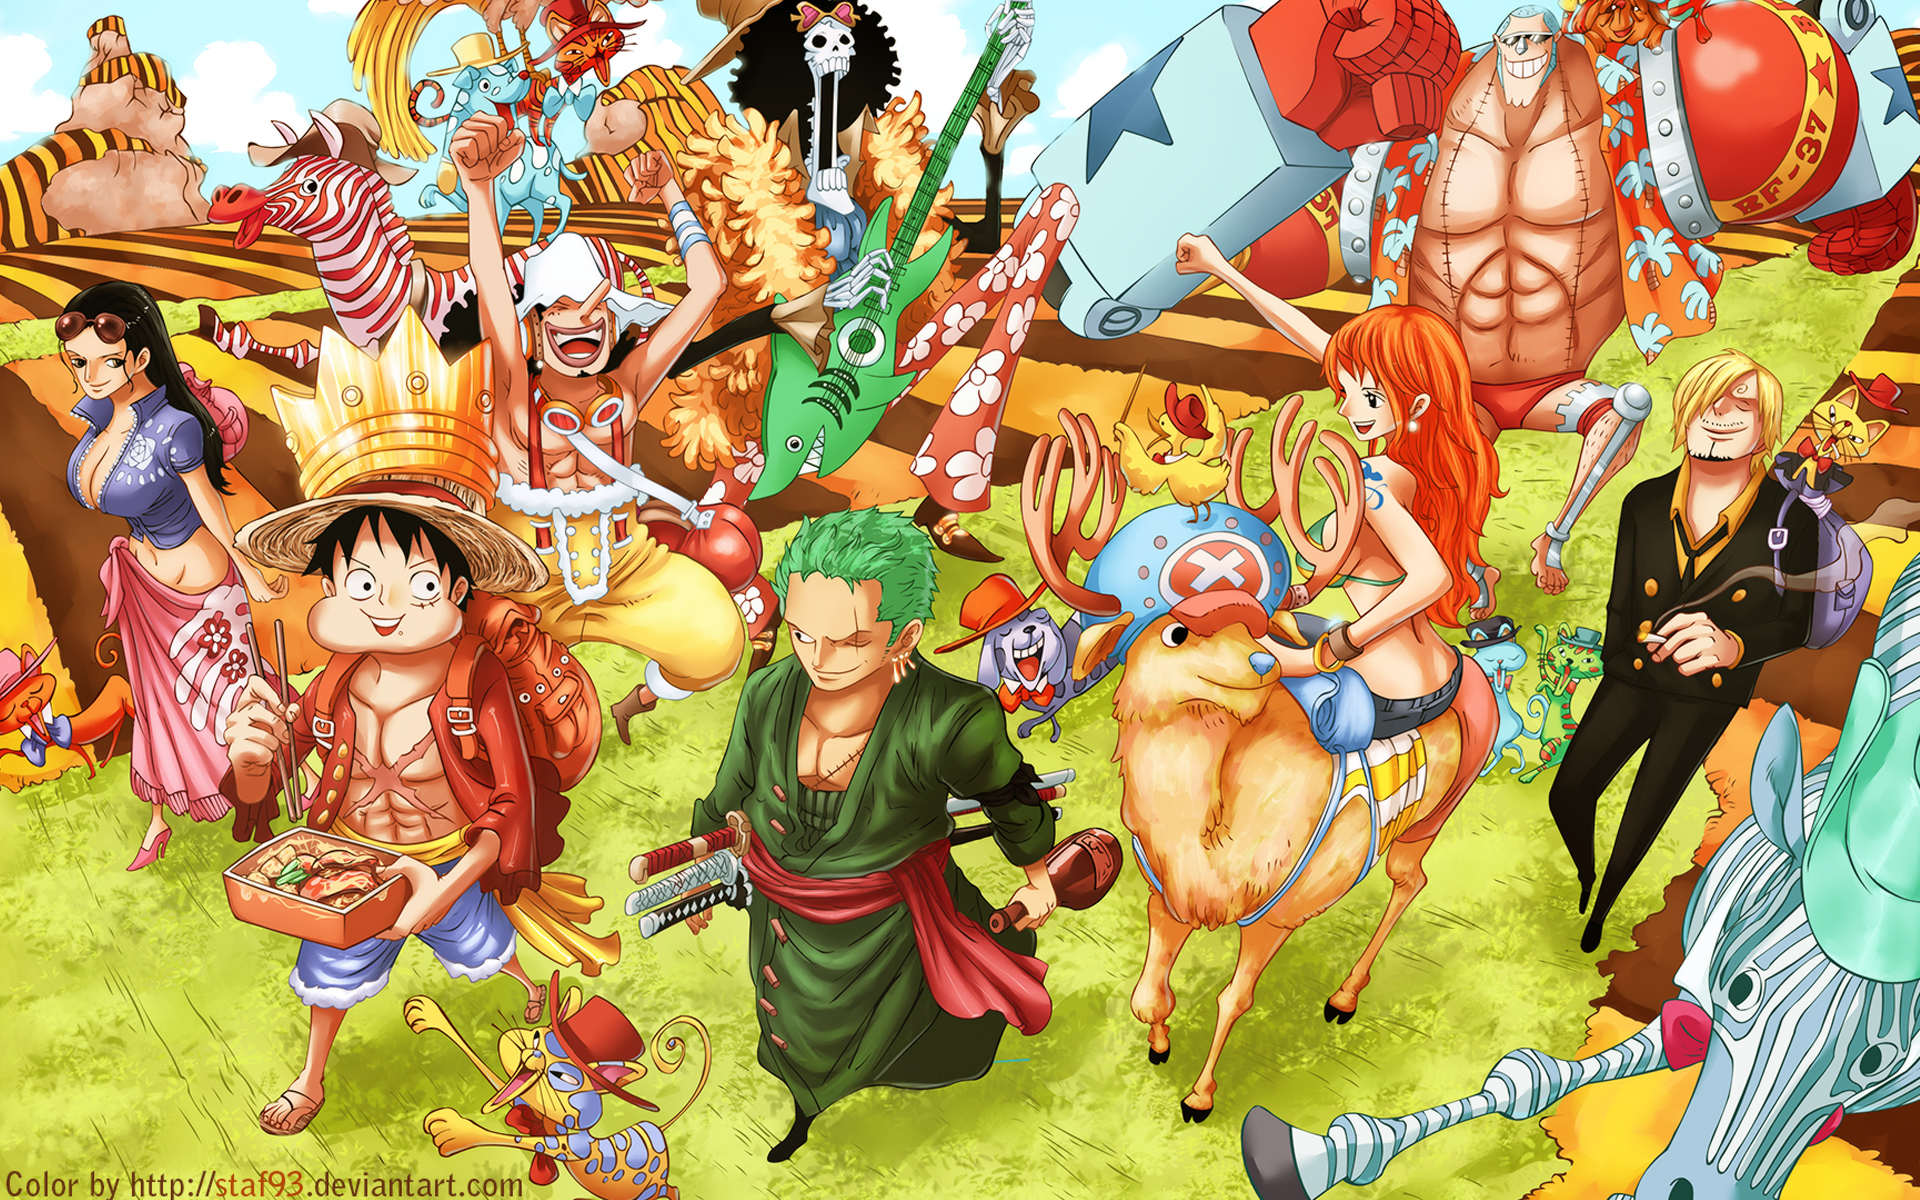  one piece anime hd wallpaper full resolution 1920x1200 and compatible